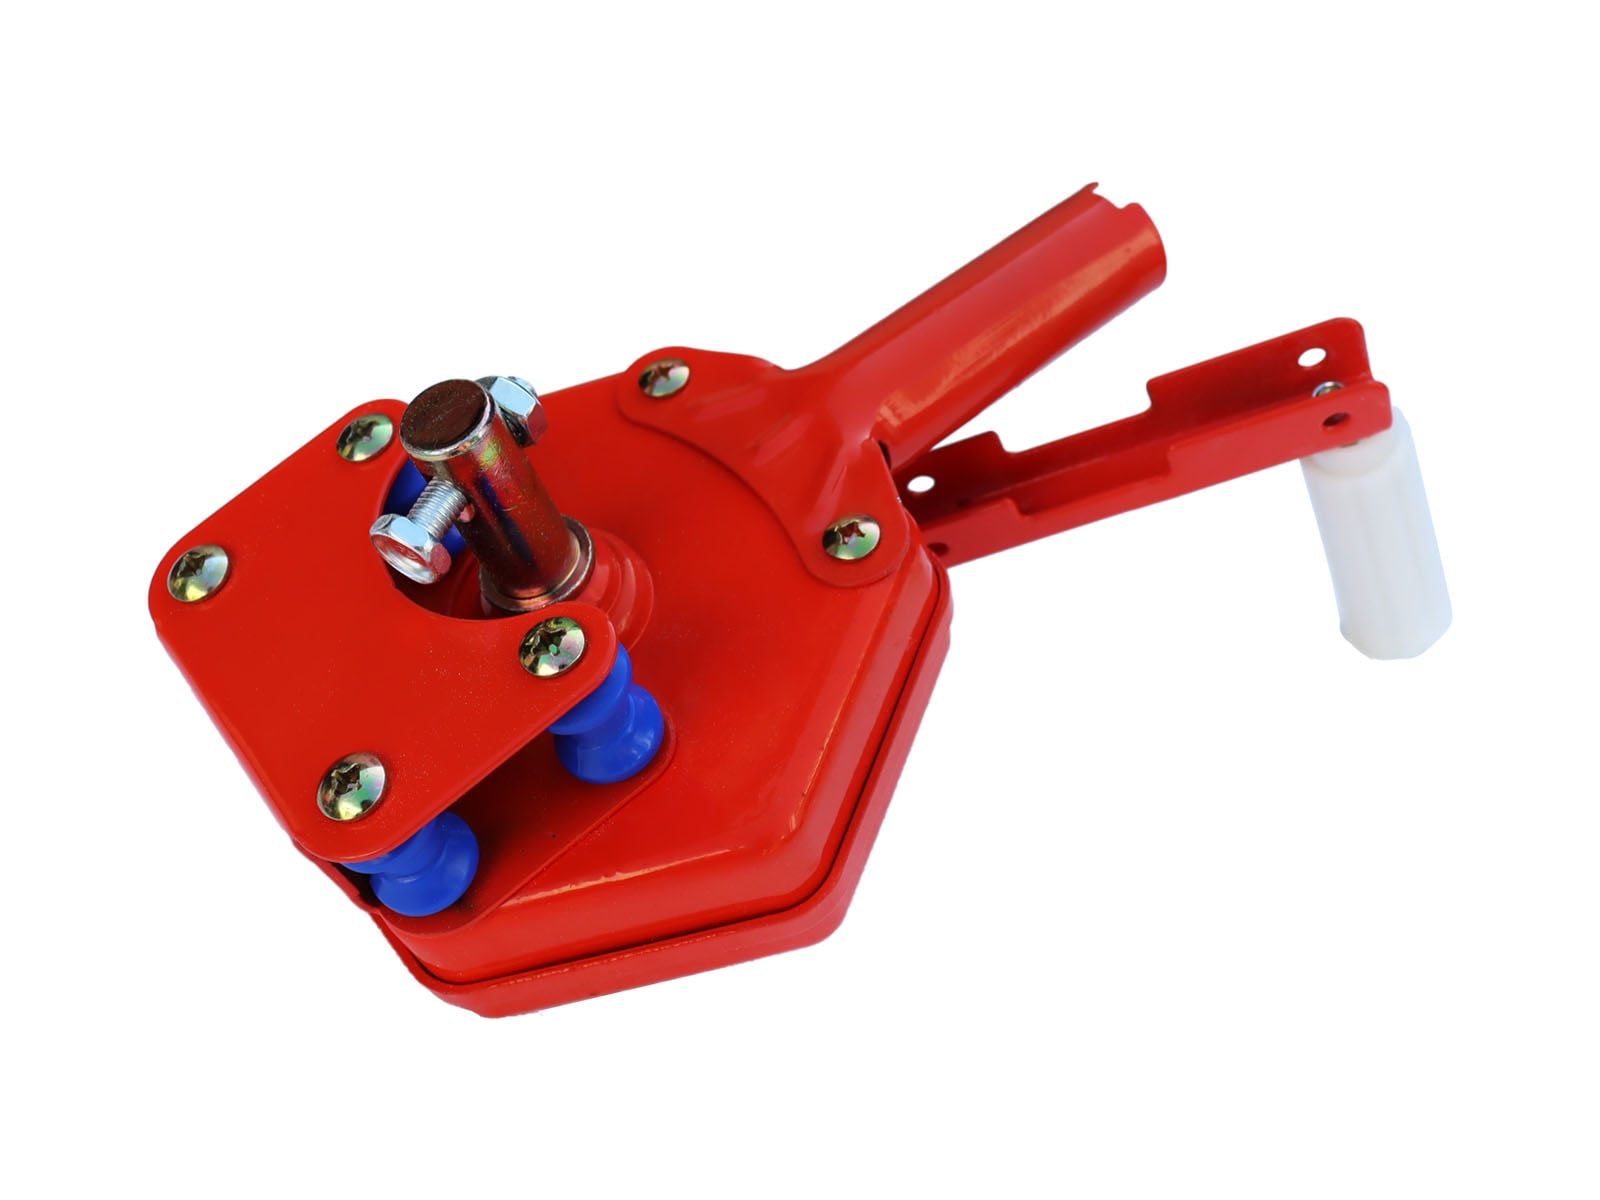 Manual Hand Crank Winch For Greenhouse Sidewall Ventilation